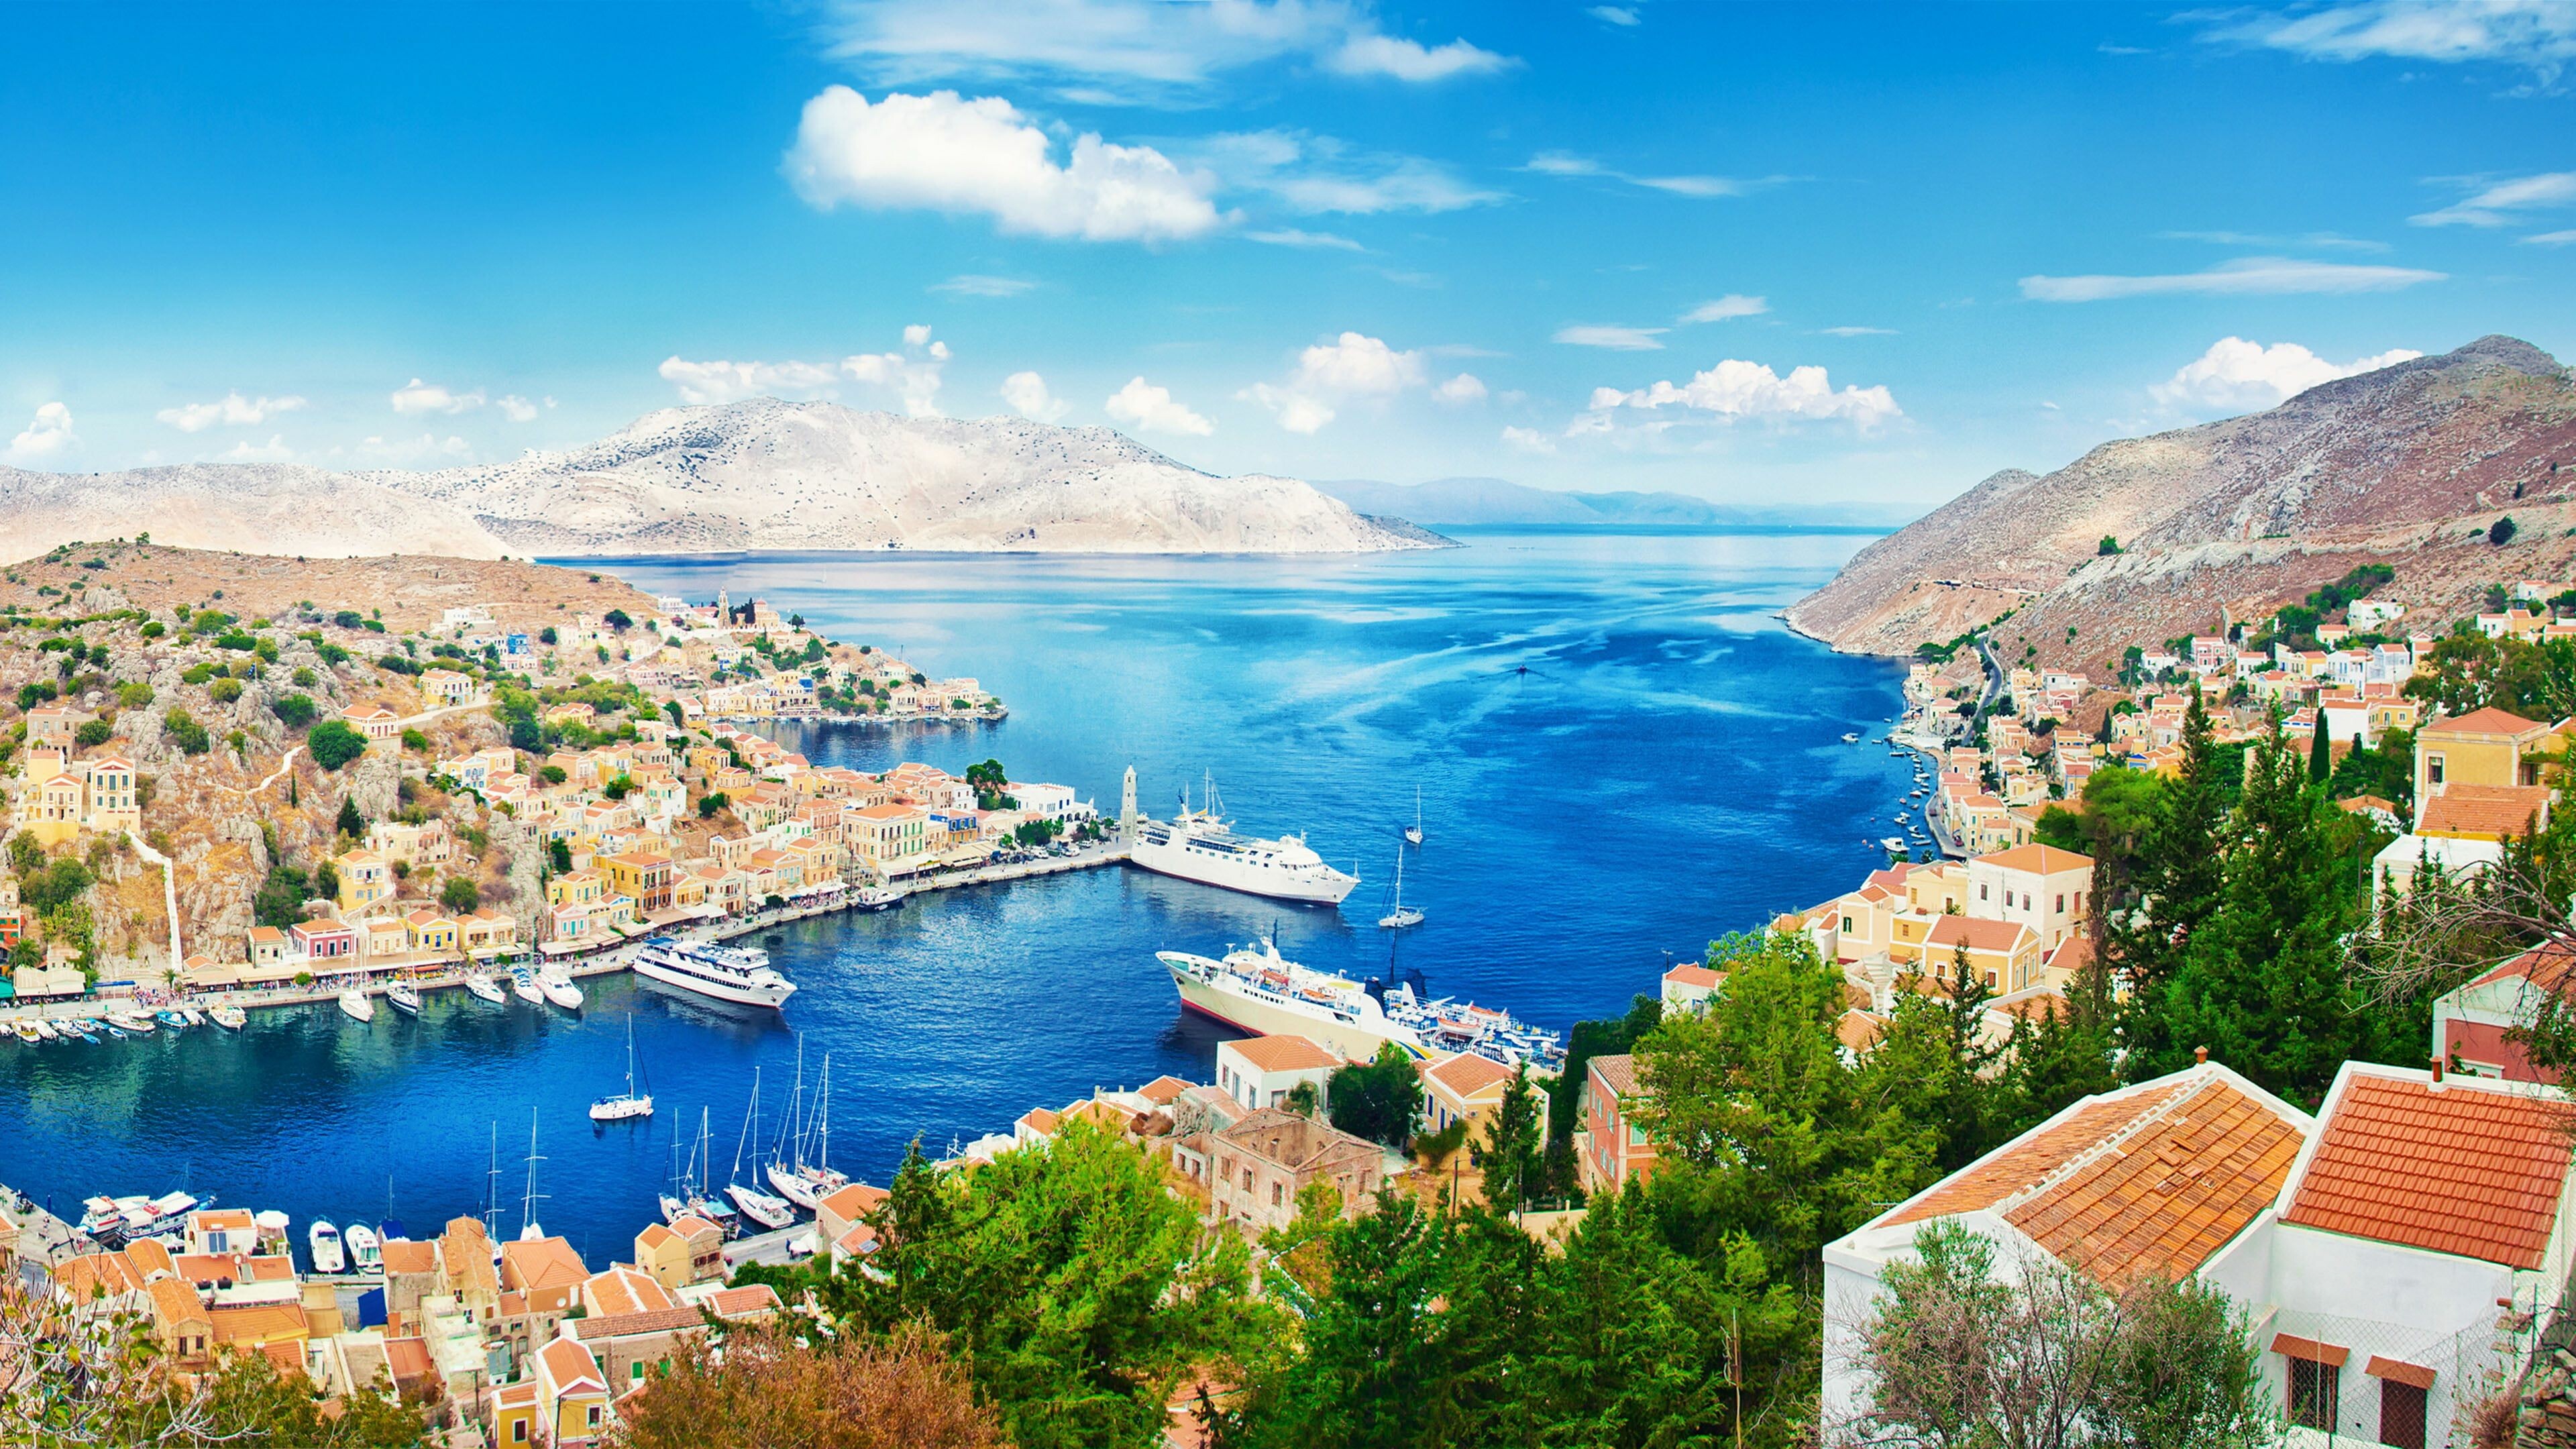 Greece: Symi Island, Located at the crossroads of Europe, Asia, and Africa. 3840x2160 4K Wallpaper.